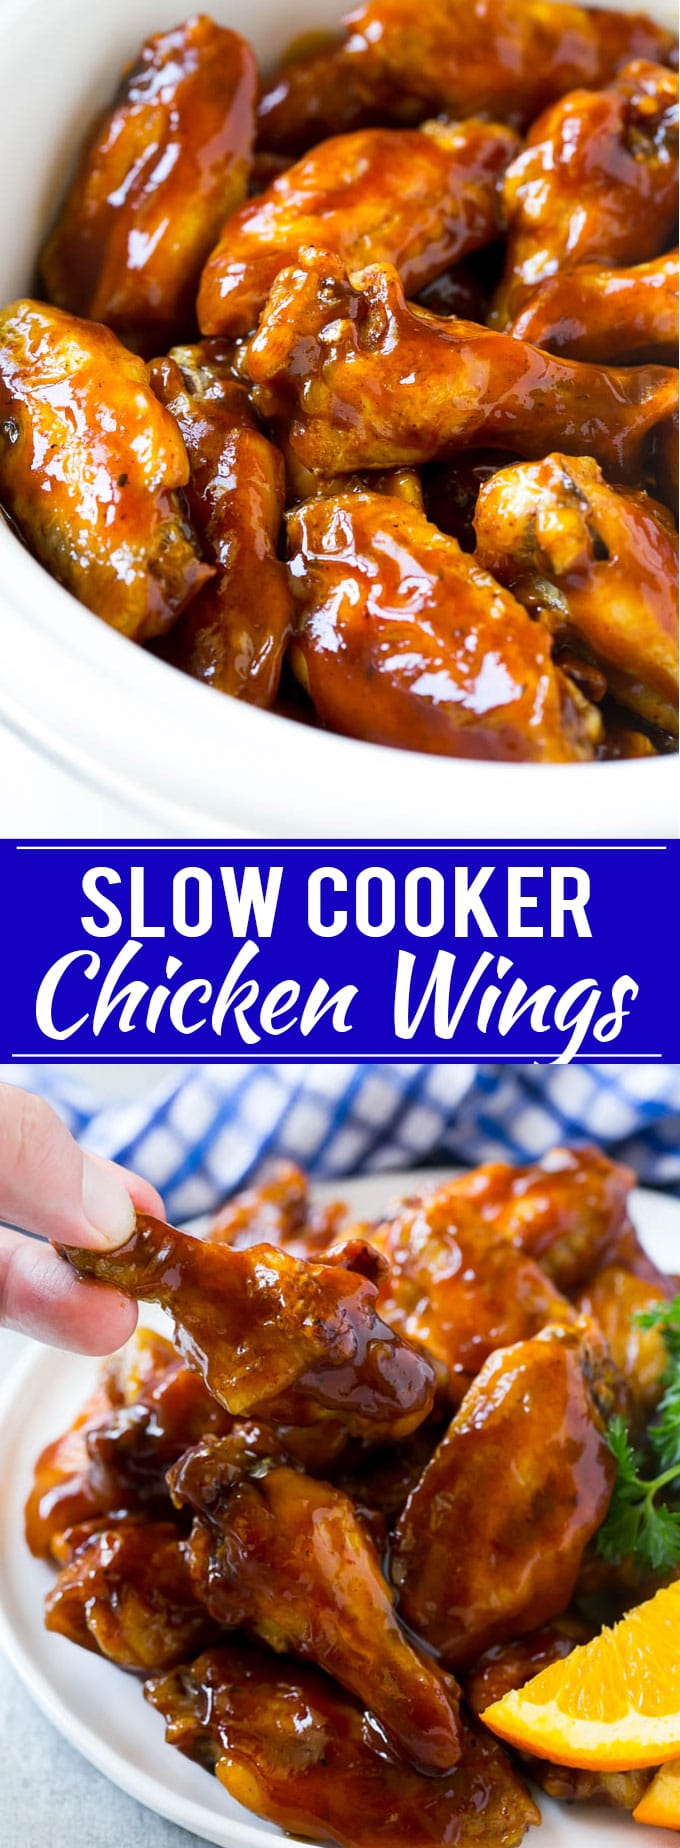 Slow Cooker Barbecue Chicken Wings | Crock Pot Chicken Wings | Barbecue Chicken Wings | Easy Chicken Wings #chickenwings #slowcooker #crockpot #bbqchicken #partywings #appetizer #dinneratthezoo